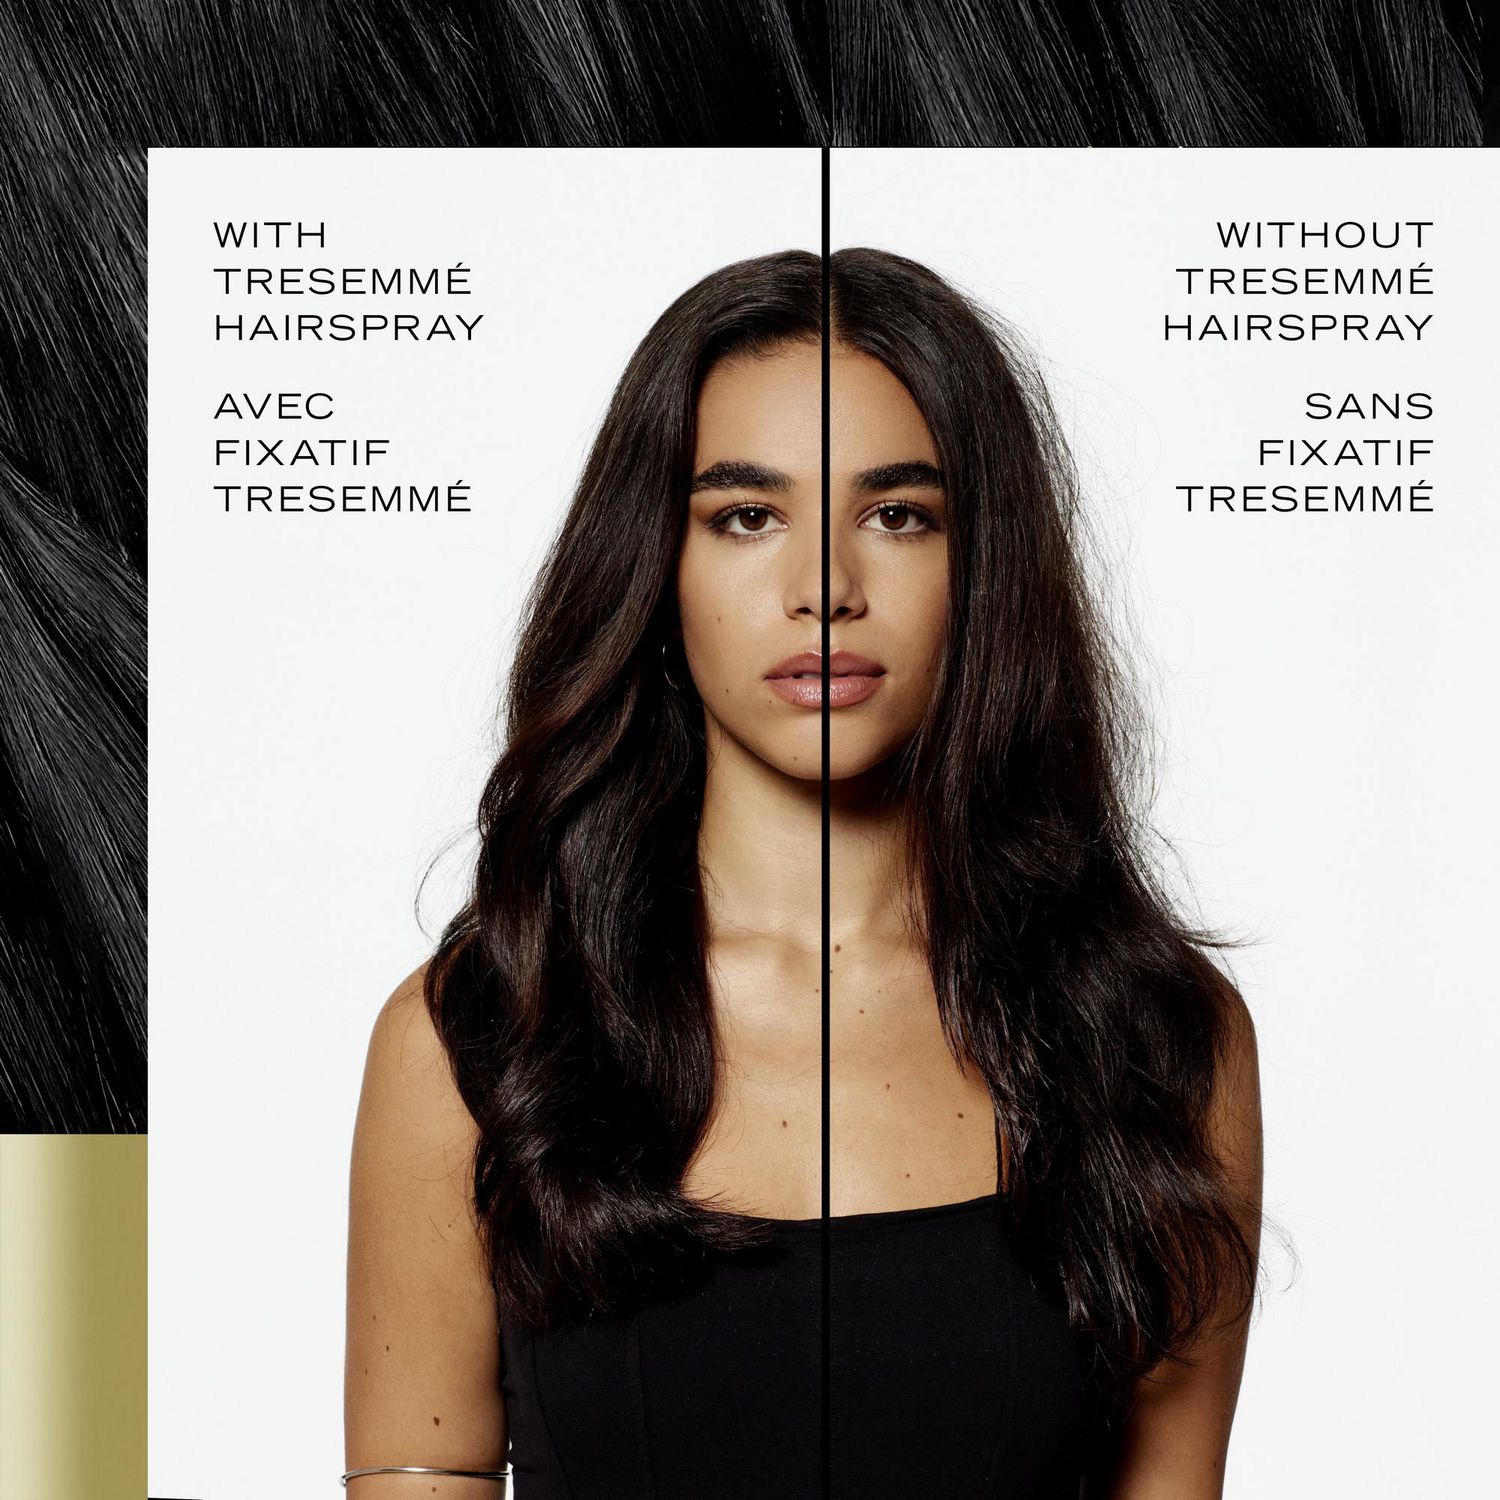 Tresemme Extra Hold Hairspray for 24-hour frizz control - 311 g